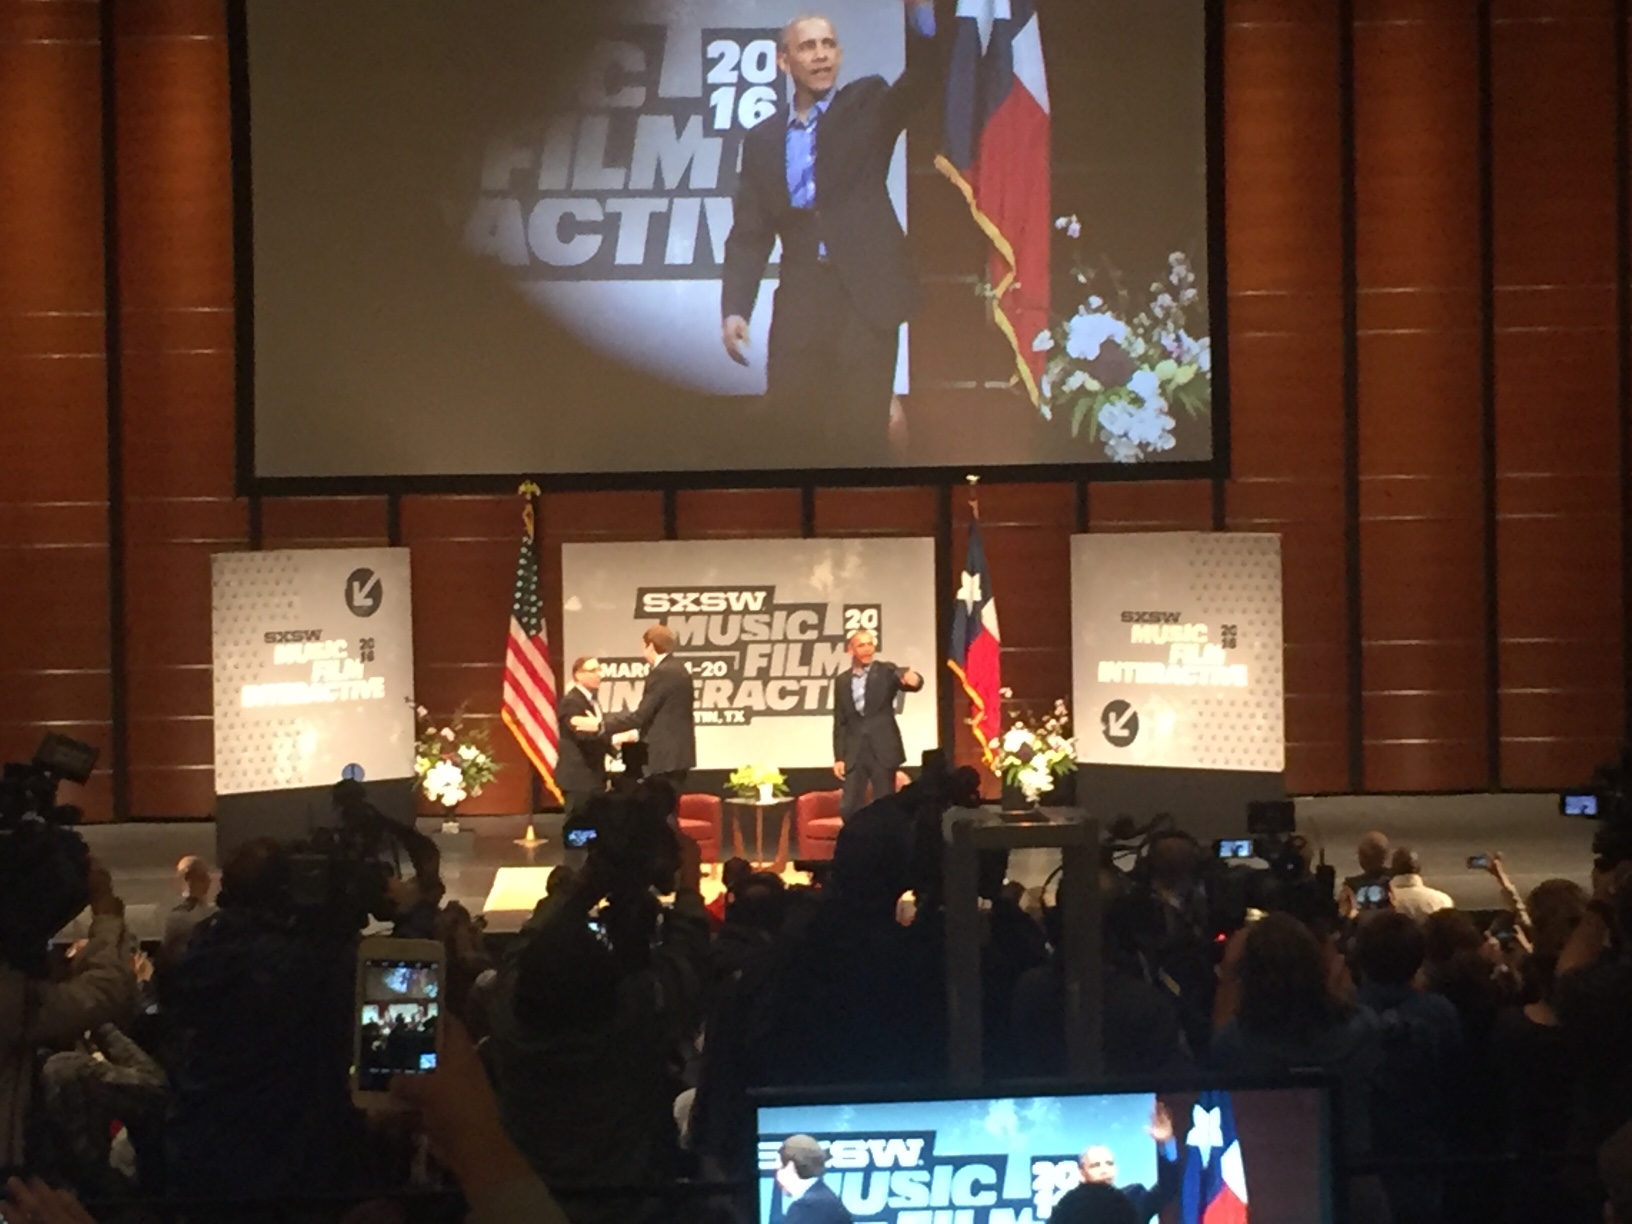 Barack Obama implored the tech bros of SXSW to use their skills to increase civic engagement.